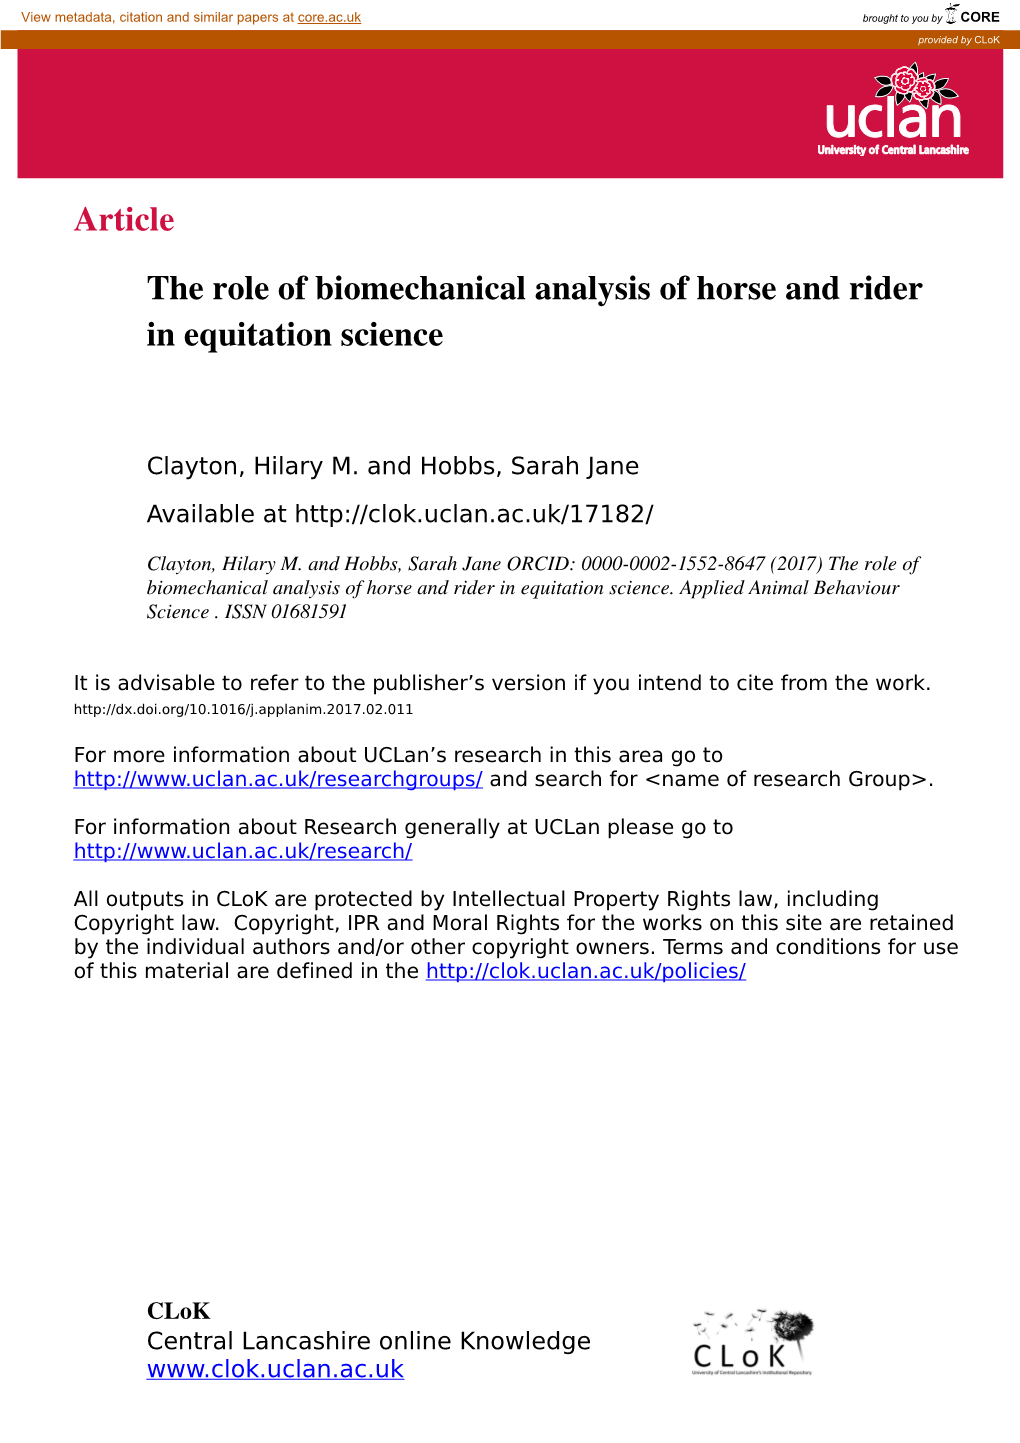 The Role of Biomechanical Analysis of Horse and Rider in Equitation Science